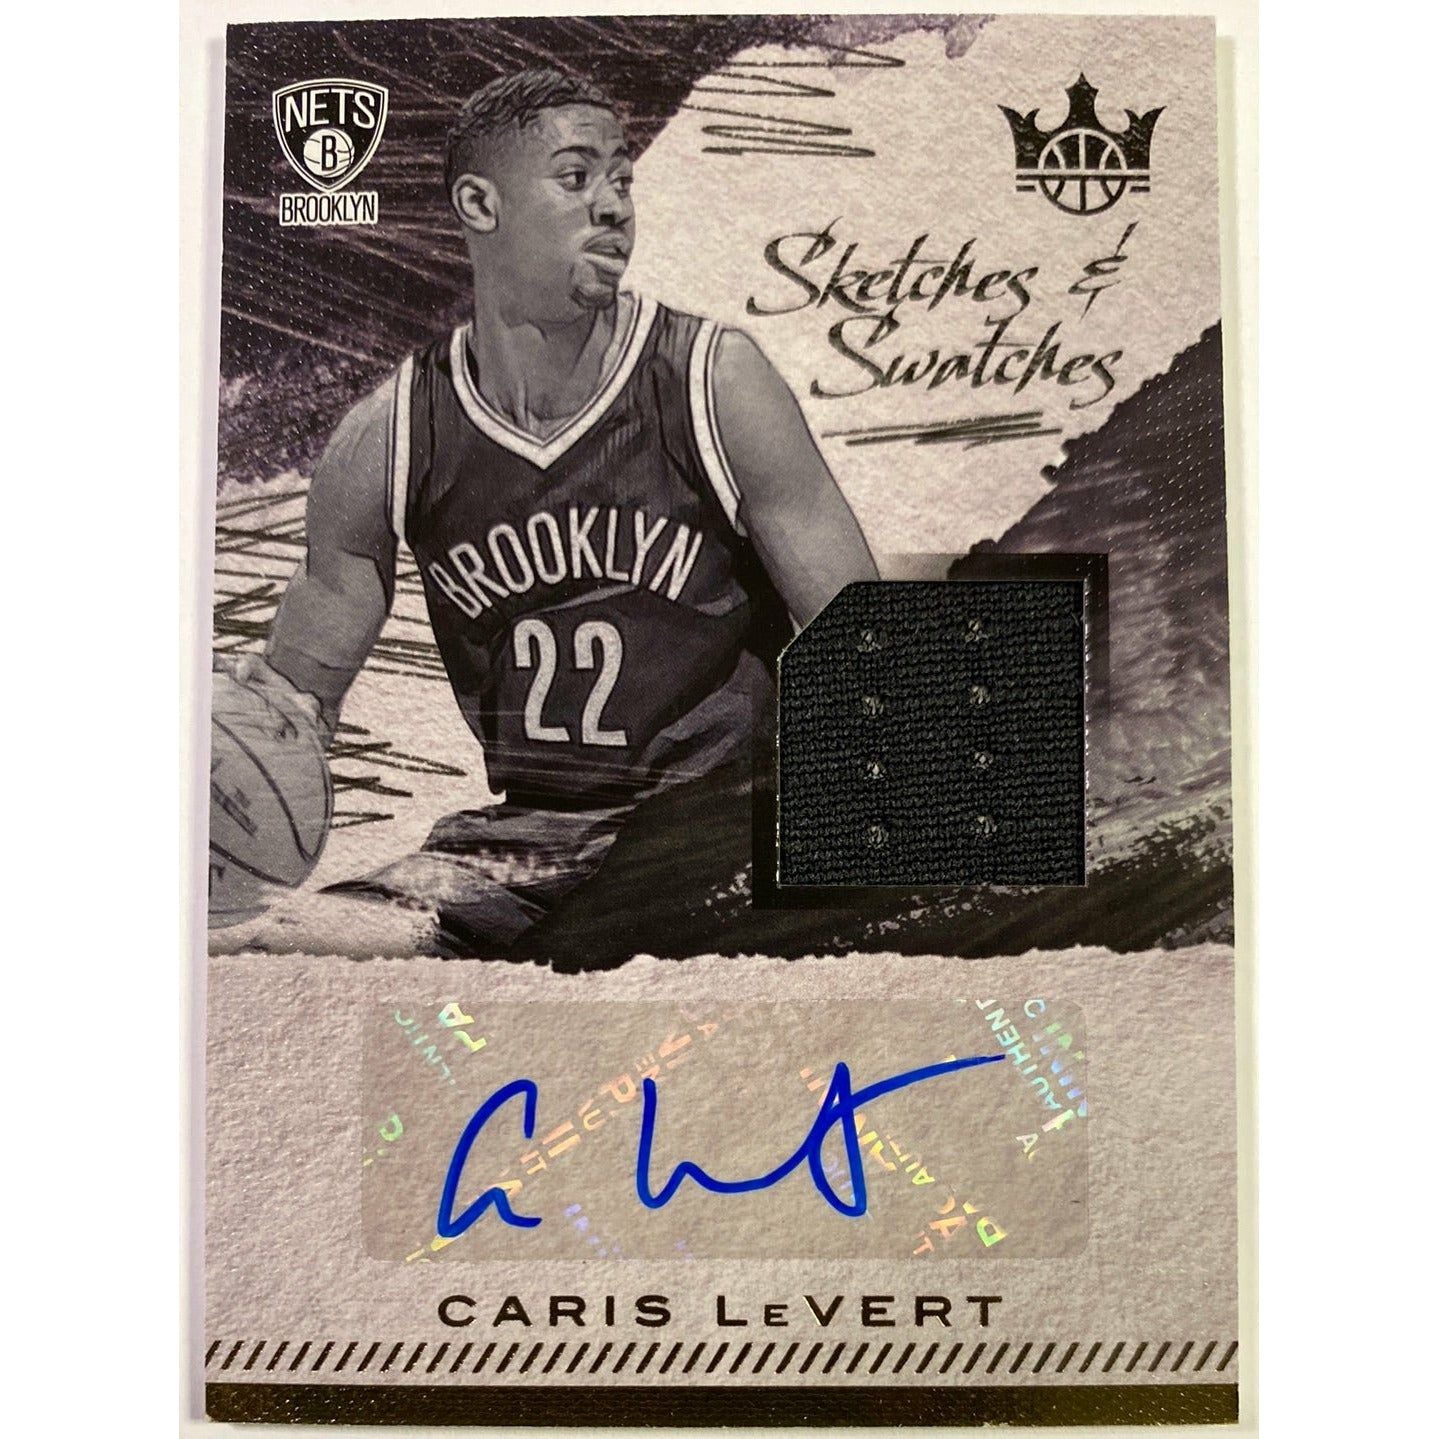  2017-18 Court Kings Caris Lavert Sketches and Swatches /399  Local Legends Cards & Collectibles